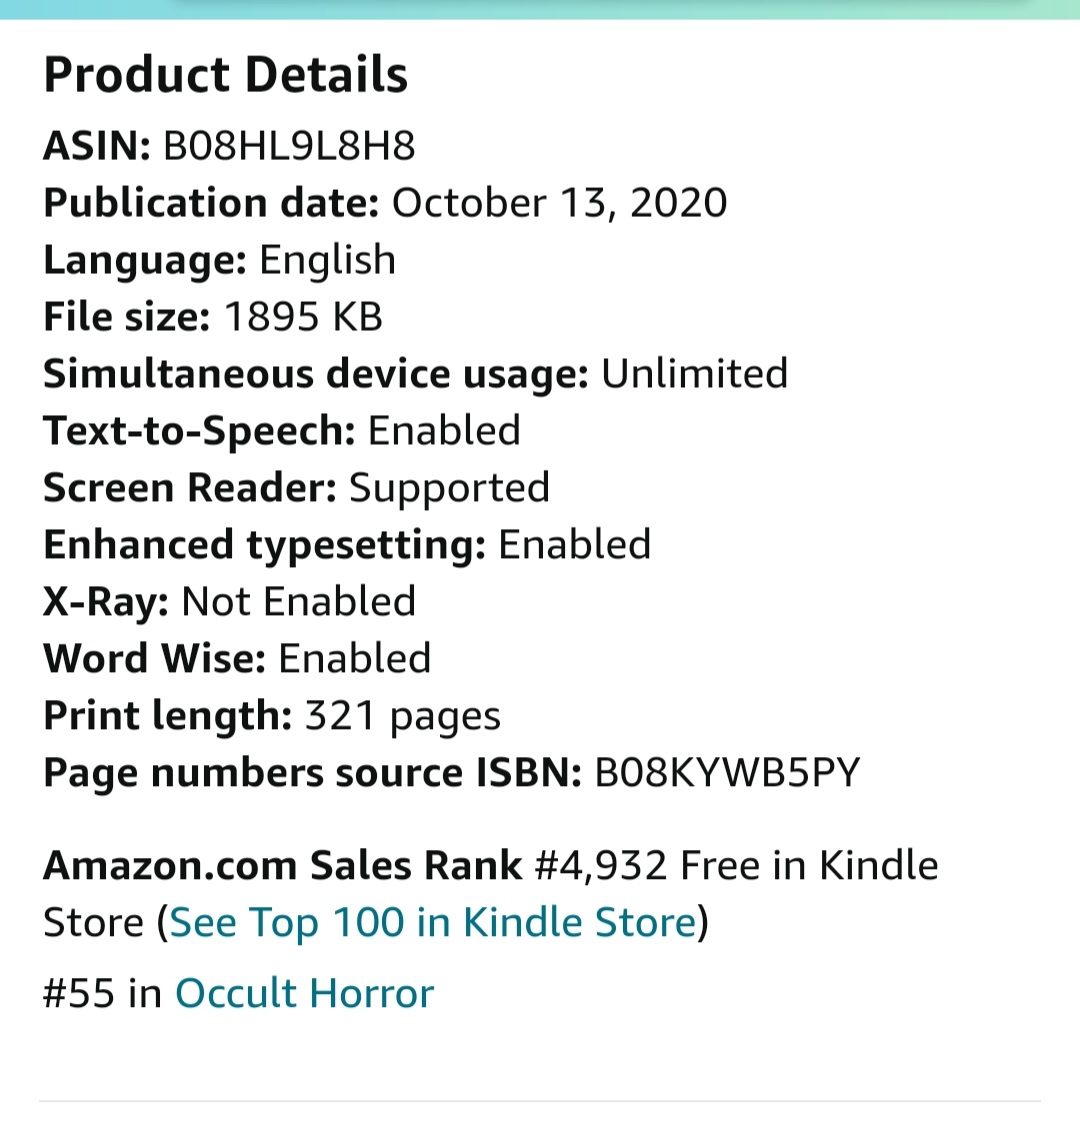 Thanks to you all, Grim Fate is currently sitting at #55 for free Kindle Occult Horror. Remember, this book and Syndrome are free through Halloween. Get your copy now! Let's see if we can get it even higher on the list.